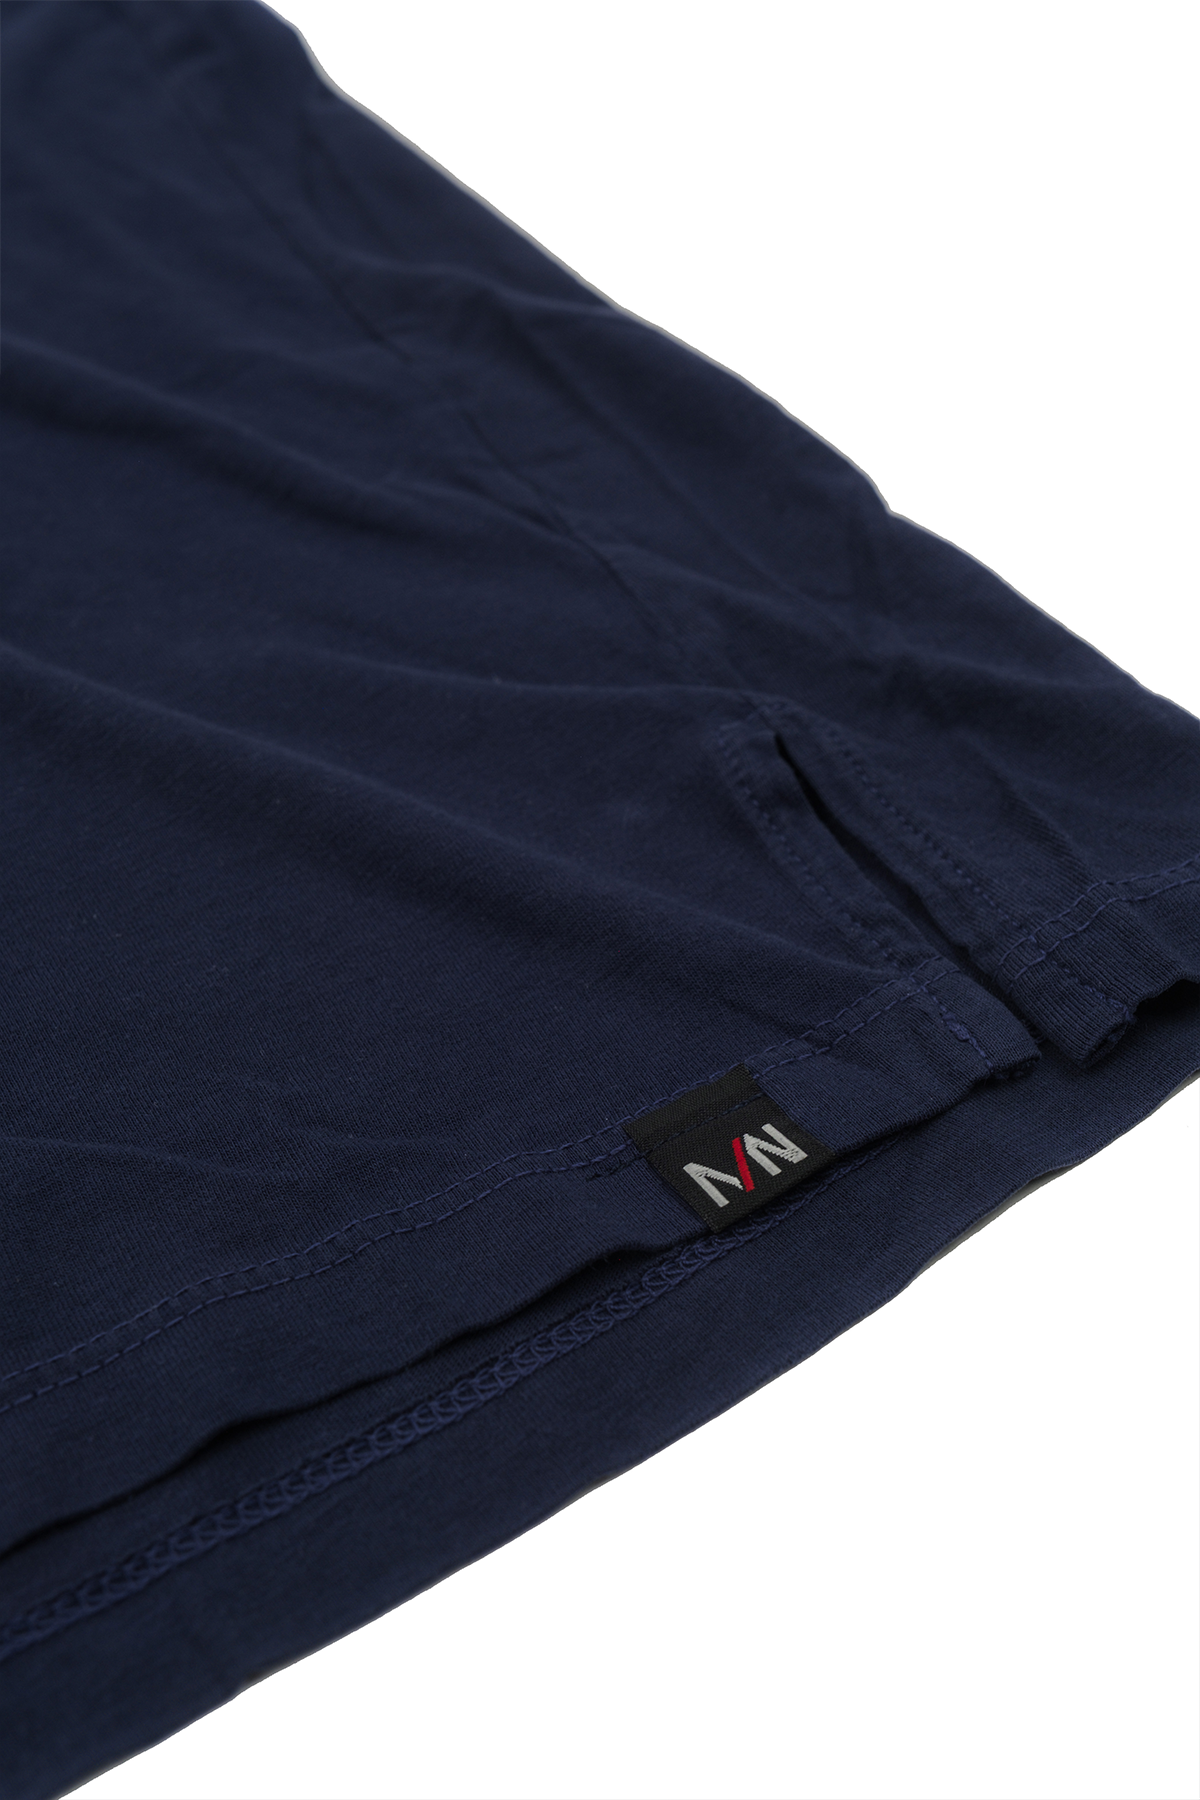 Close up of navy v-neck t-shirt laid flat on a white background.